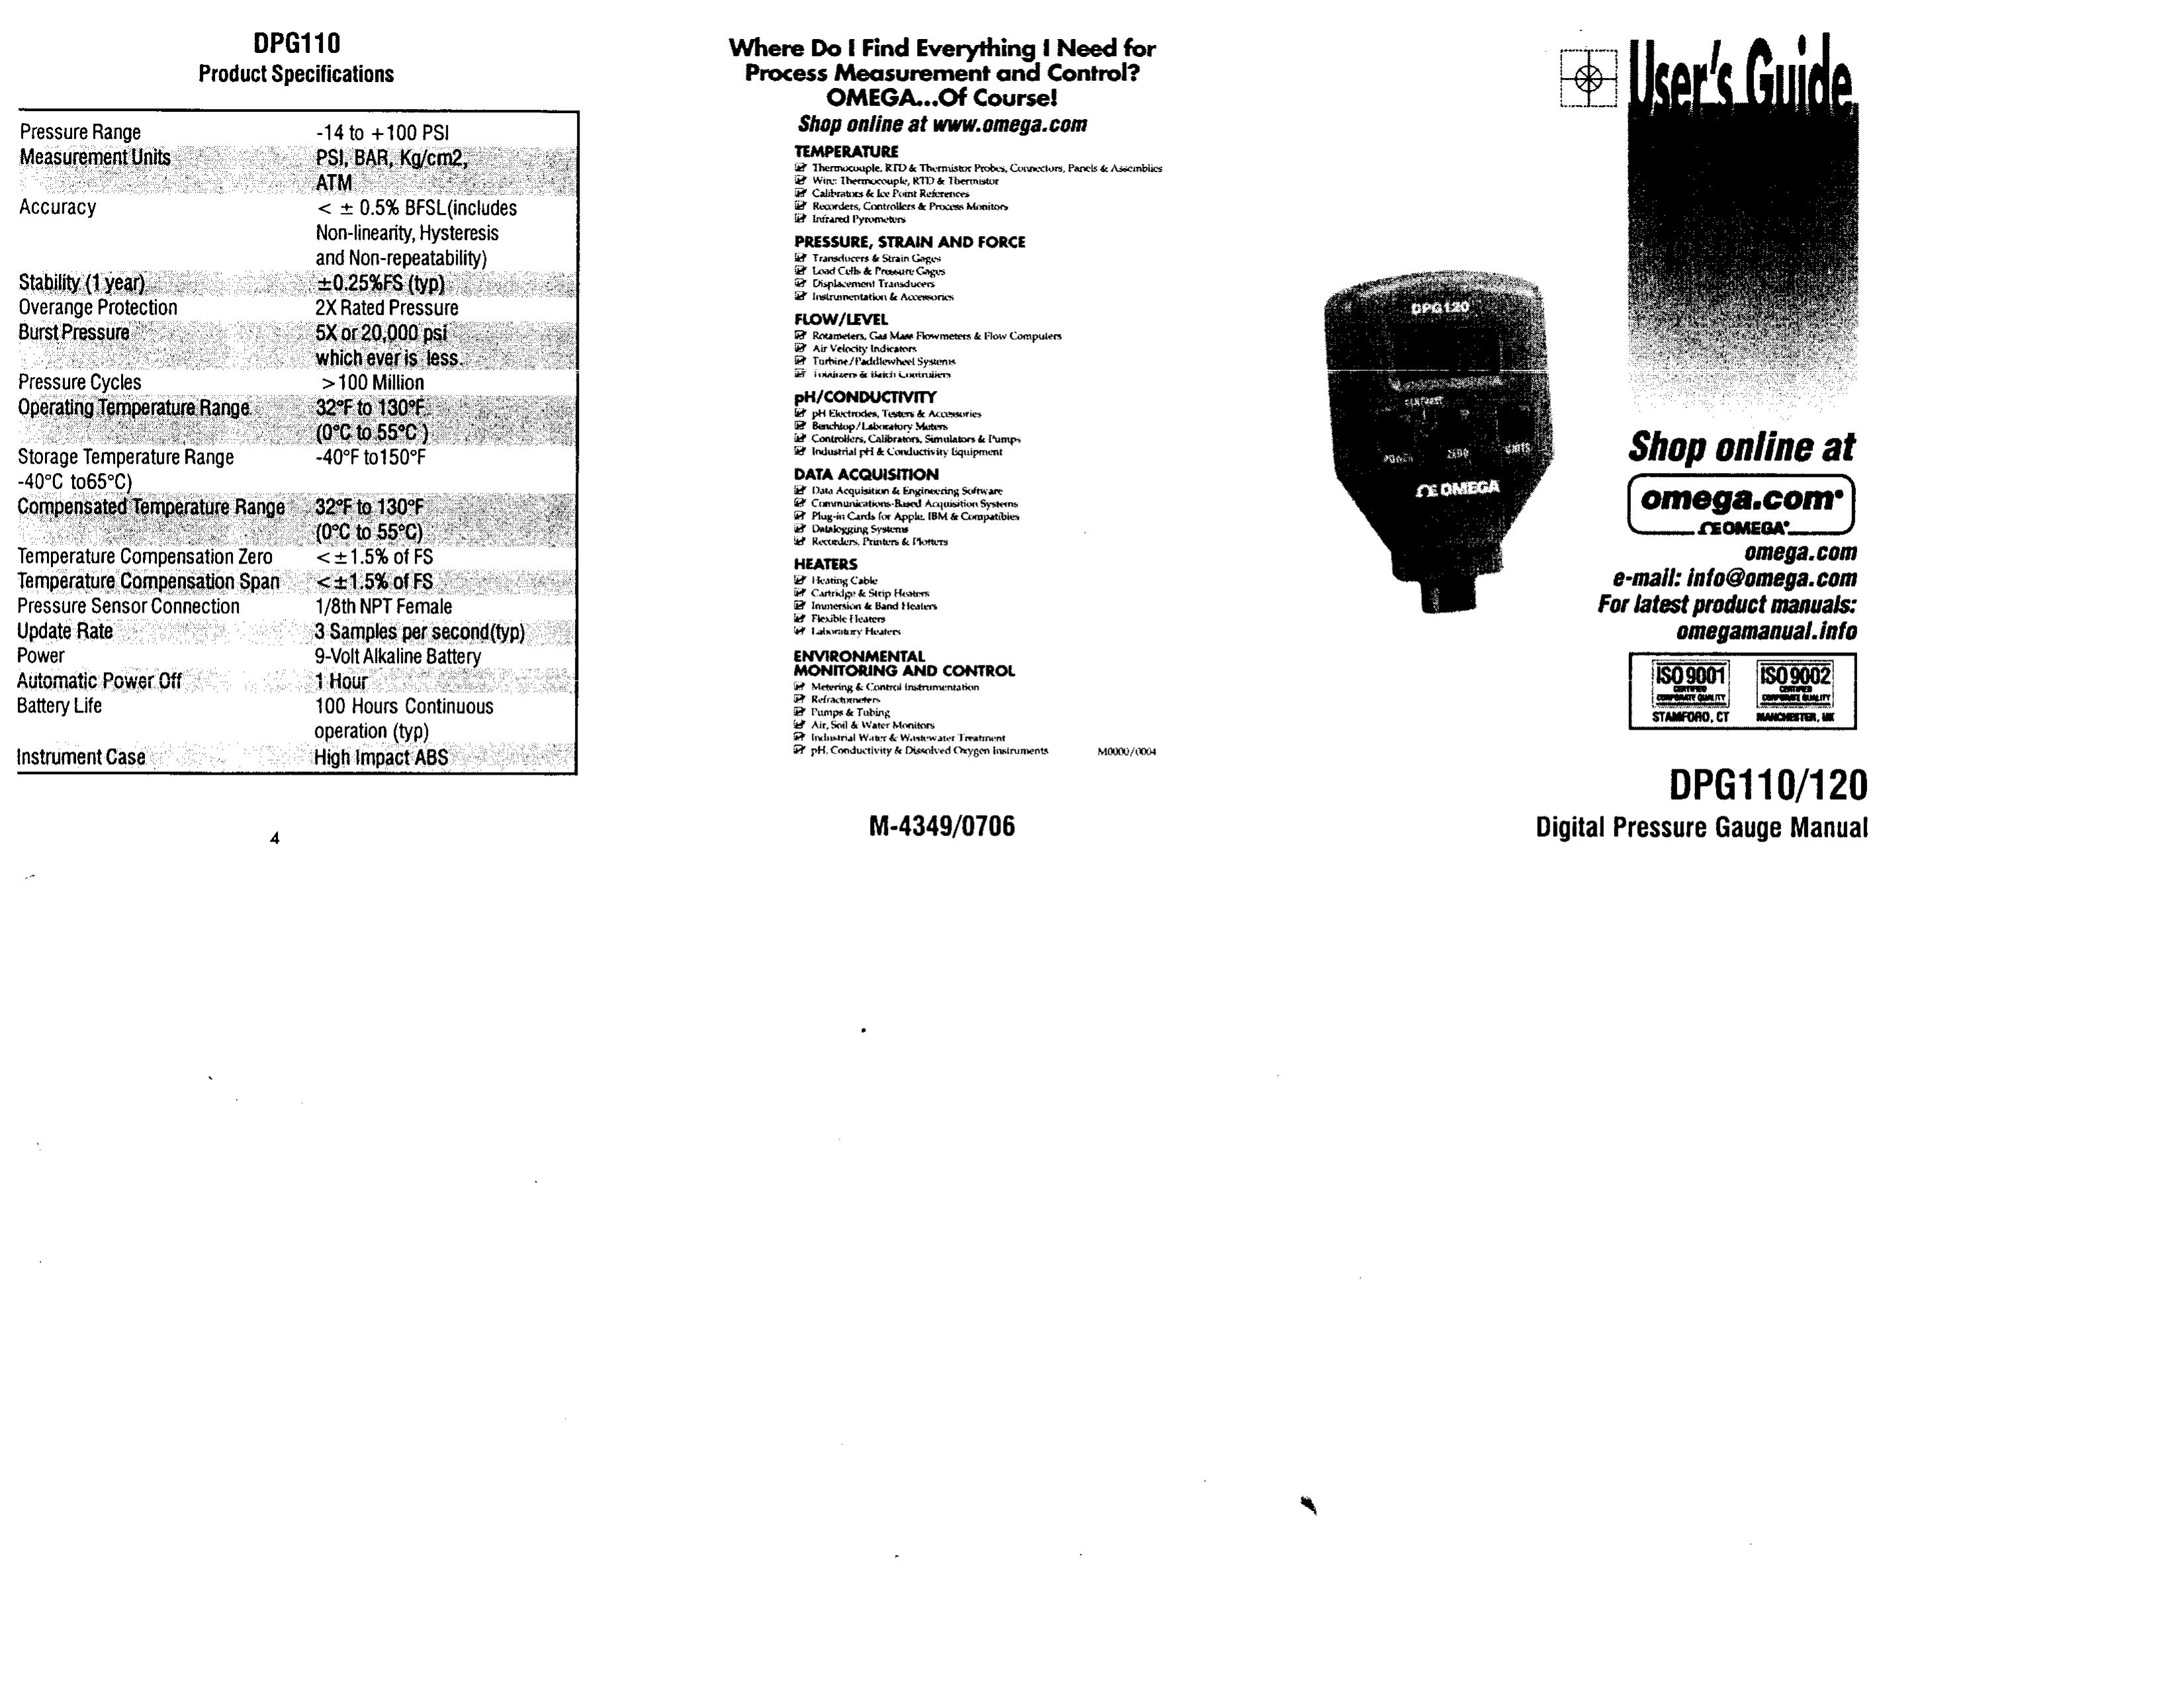 Omega DPG110/120 Thermometer User Manual